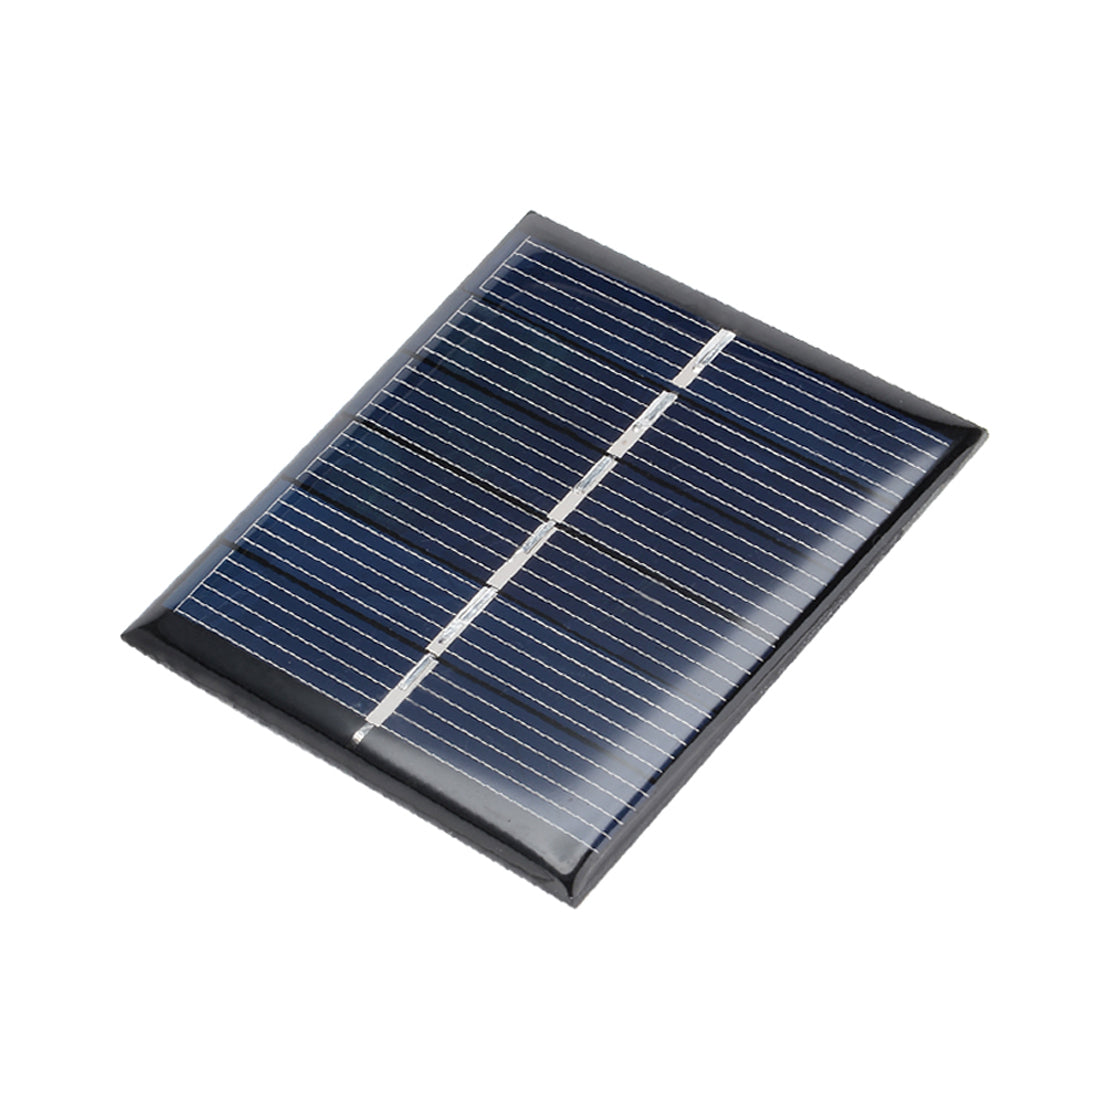 uxcell Uxcell 5Pcs 3V 110mA Poly Mini Solar Cell Panel Module DIY for Light Toys Charger 60mm x 55mm